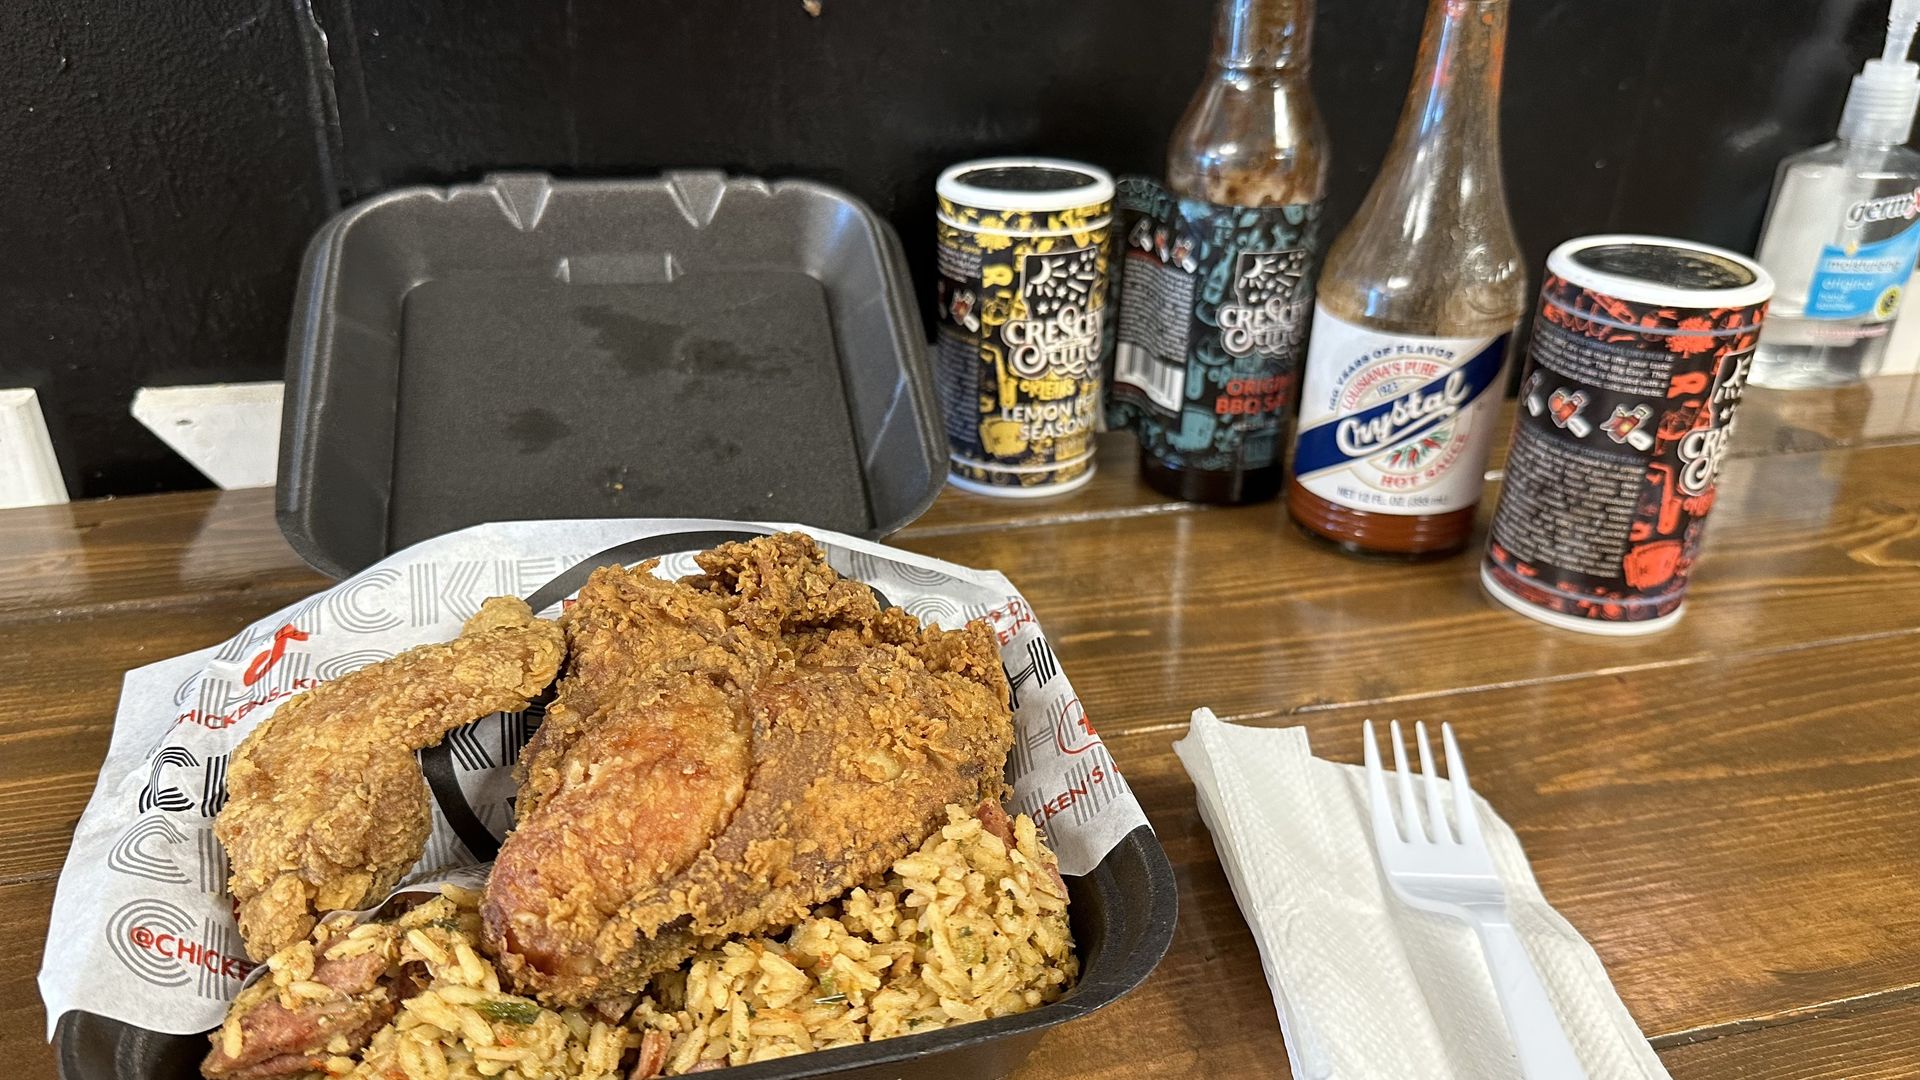 Fried chicken sits atop an open and very full styrofoam clamshell takeout container. Jambalaya is seen beneath the chicken, and hot sauces are set to the side of the container.